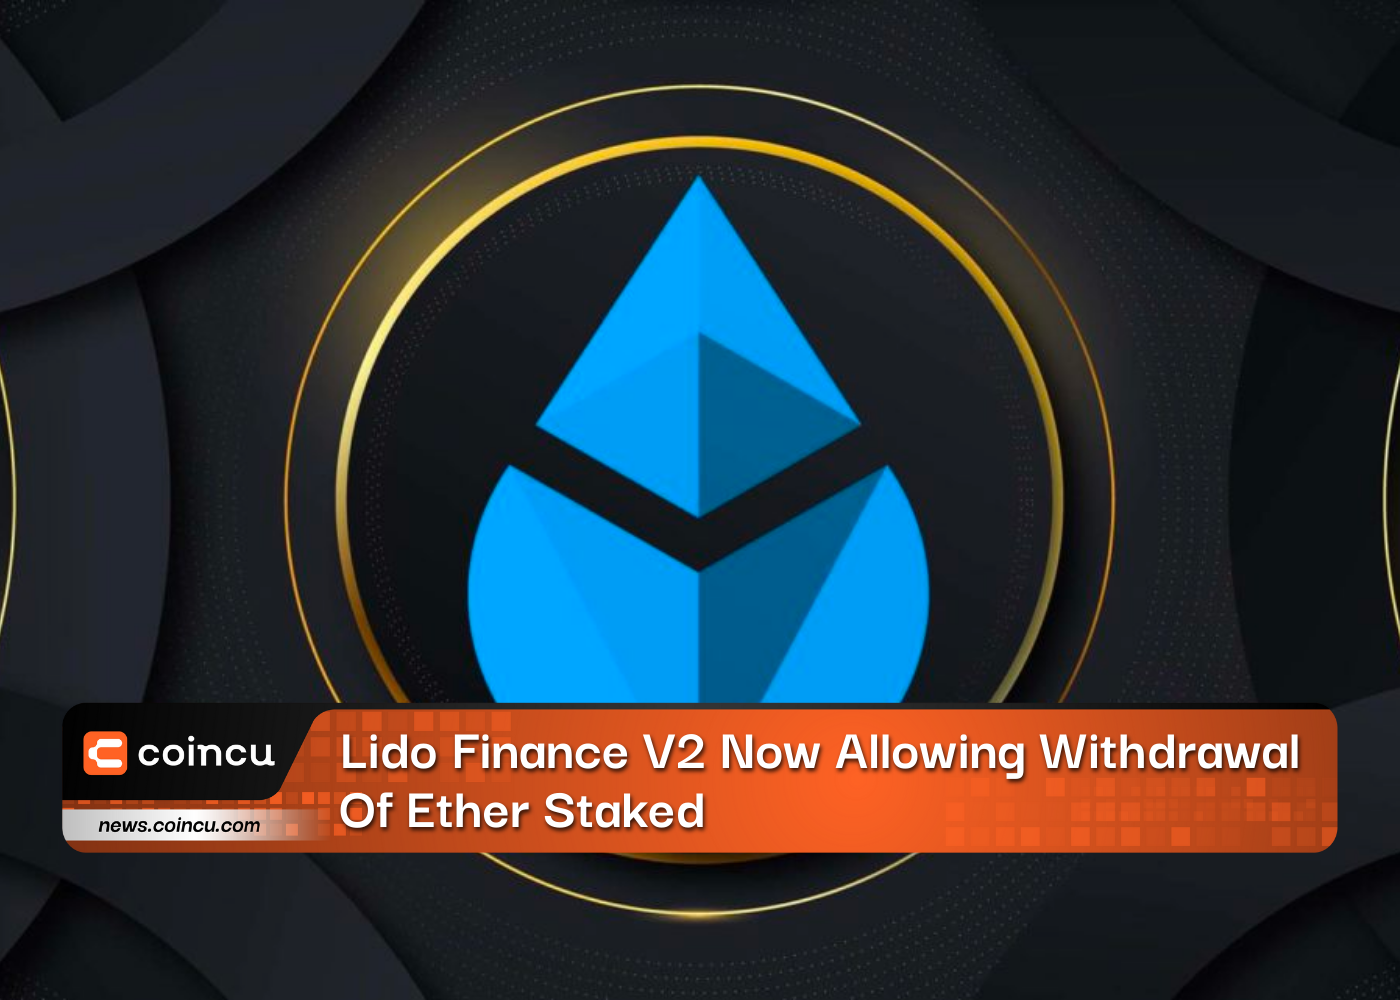 Lido Finance V2 Now Allowing Withdrawal Of Ether Staked